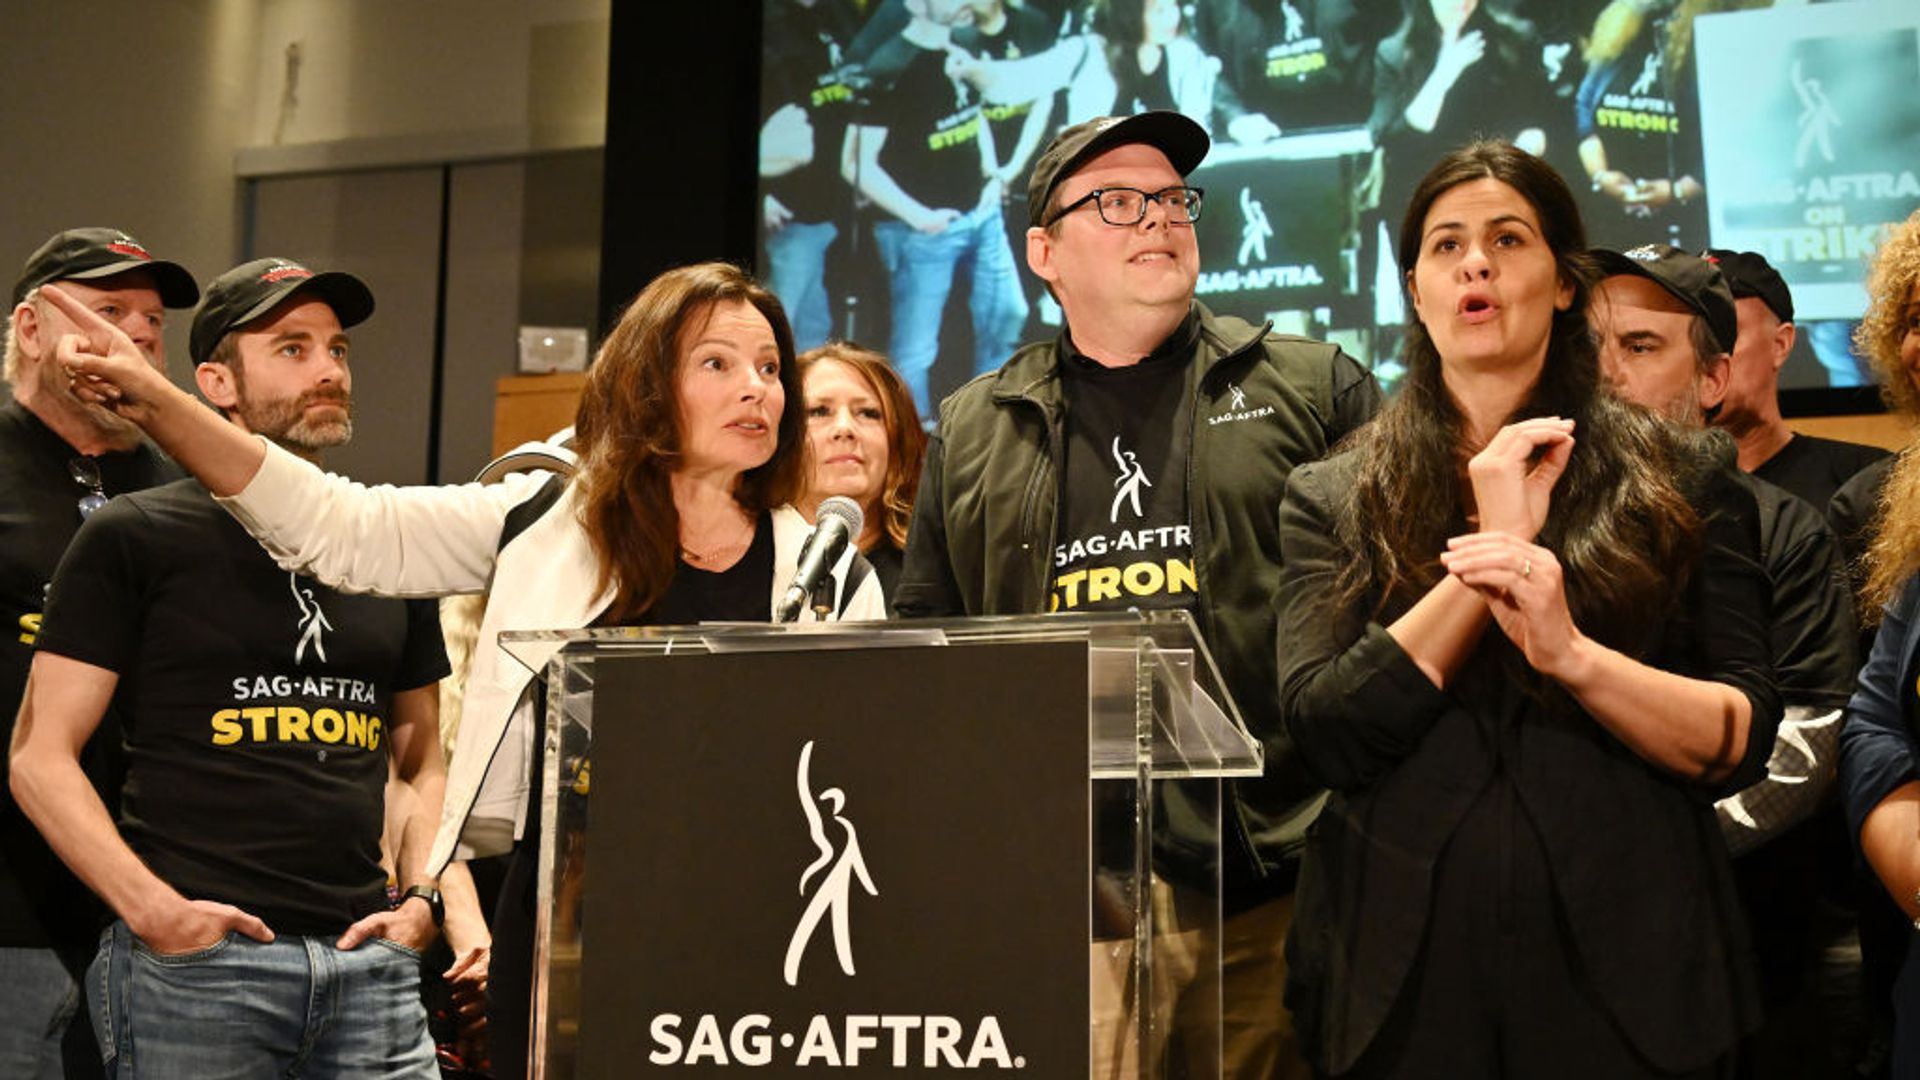 Fran Drescher delivers a passionate speech during a press conference at SAG-AFTRA headquarters in Los Angeles